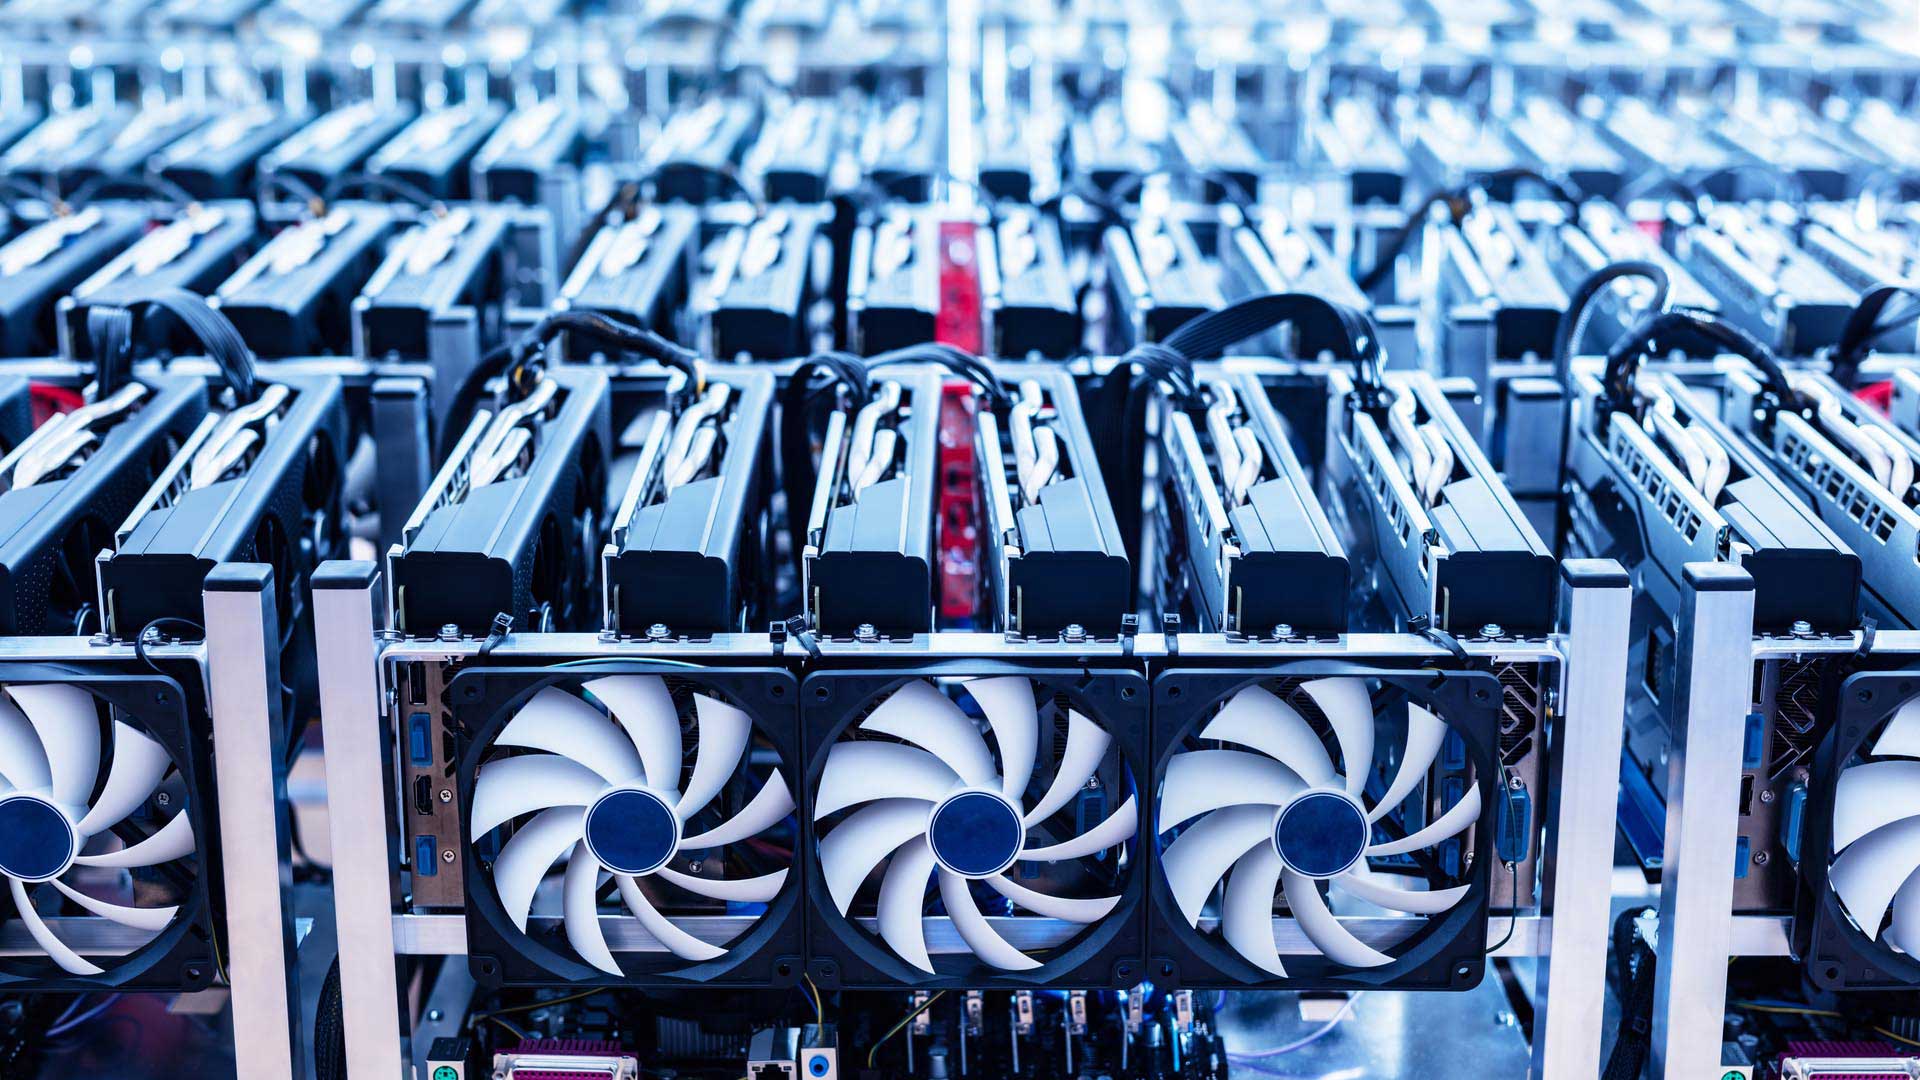 The Bitmain company donates a million dollars to the University of Hong Kong to fund research on the environmental impact of bitcoin mining